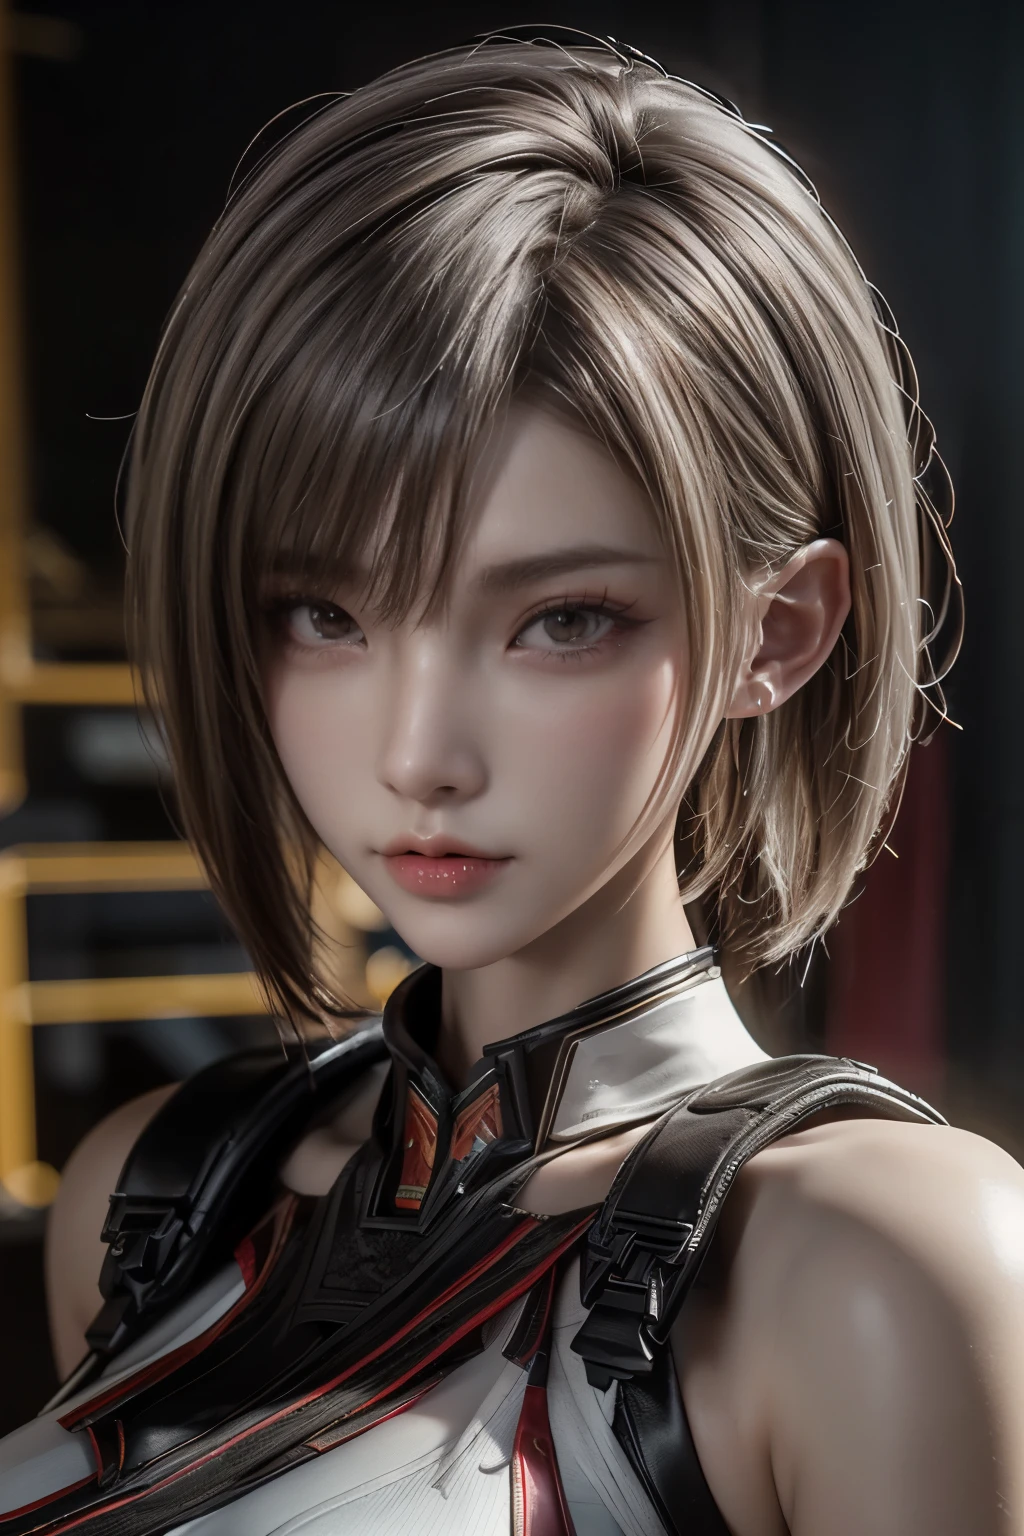 Masterpiece,Game art,The best picture quality,Highest resolution,8K,(Portrait),Unreal Engine 5 rendering works,(Digital Photography),((Portrait Feature:1.5)),
20 year old girl,Short hair details,With long bangs,(The red eye makeup is very meticulous),(White with short hair:1.4),(Large, full breasts),Elegant and noble,Brave and charming,
(Cyberpunk combat suit combined with the characteristics of Chinese fairy costume,Combined with the characteristics of Dunhuang costumes,Ribbon,Golden pattern),Cyberpunk figures,Big moon background,
Movie lights，Ray tracing，Game CG，((3D Unreal Engine))，OC rendering reflection pattern